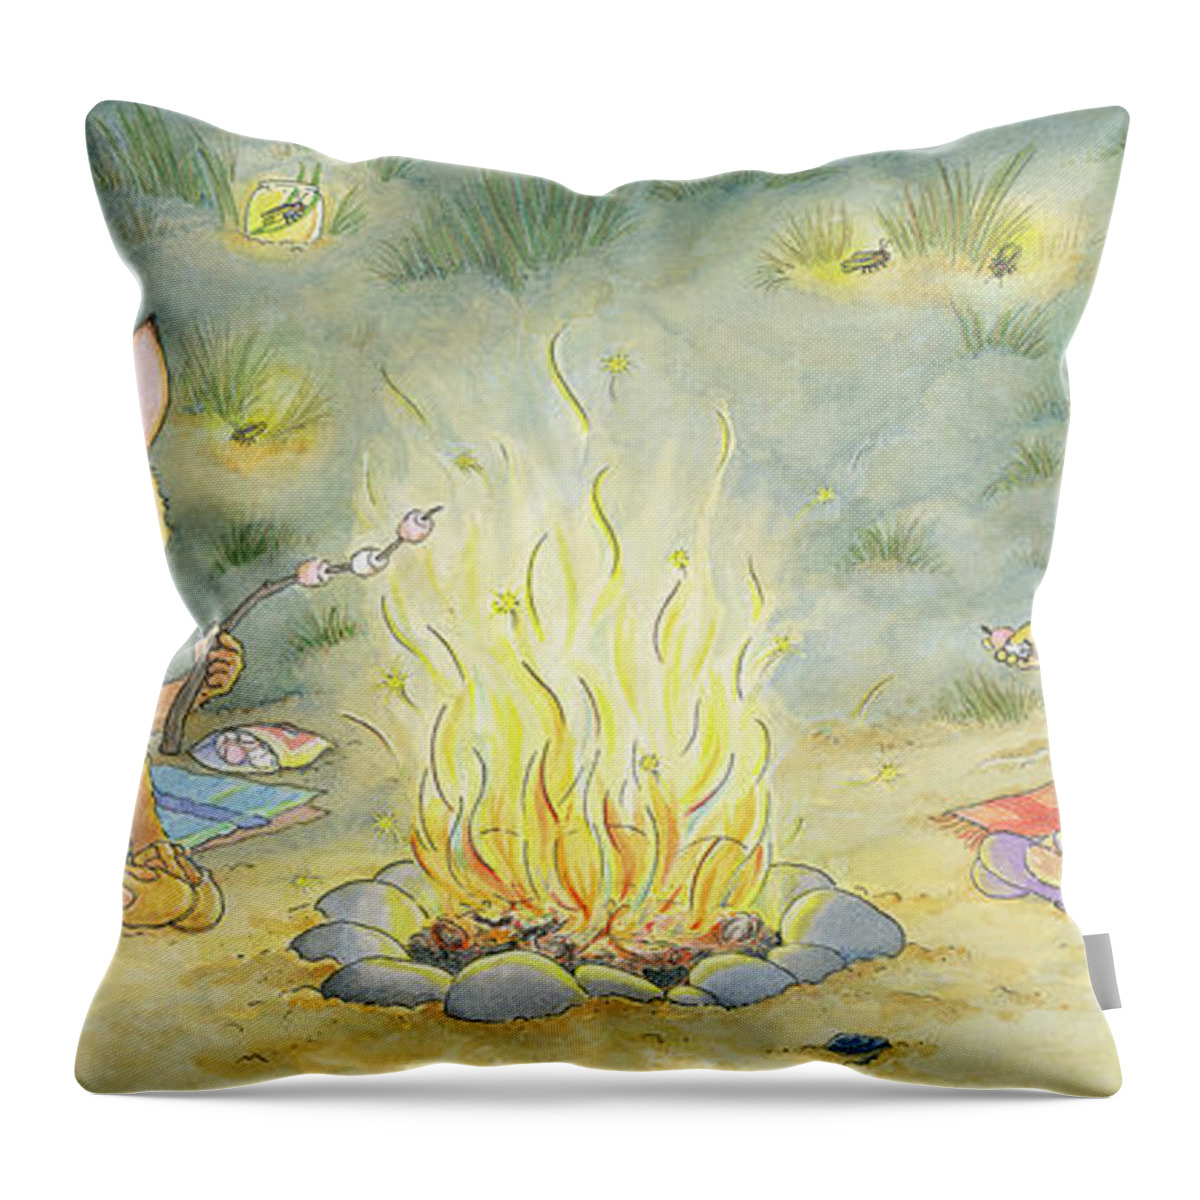 Sunny Bunnies Throw Pillow featuring the painting Roasting Marshmallows -- No Text by June Goulding